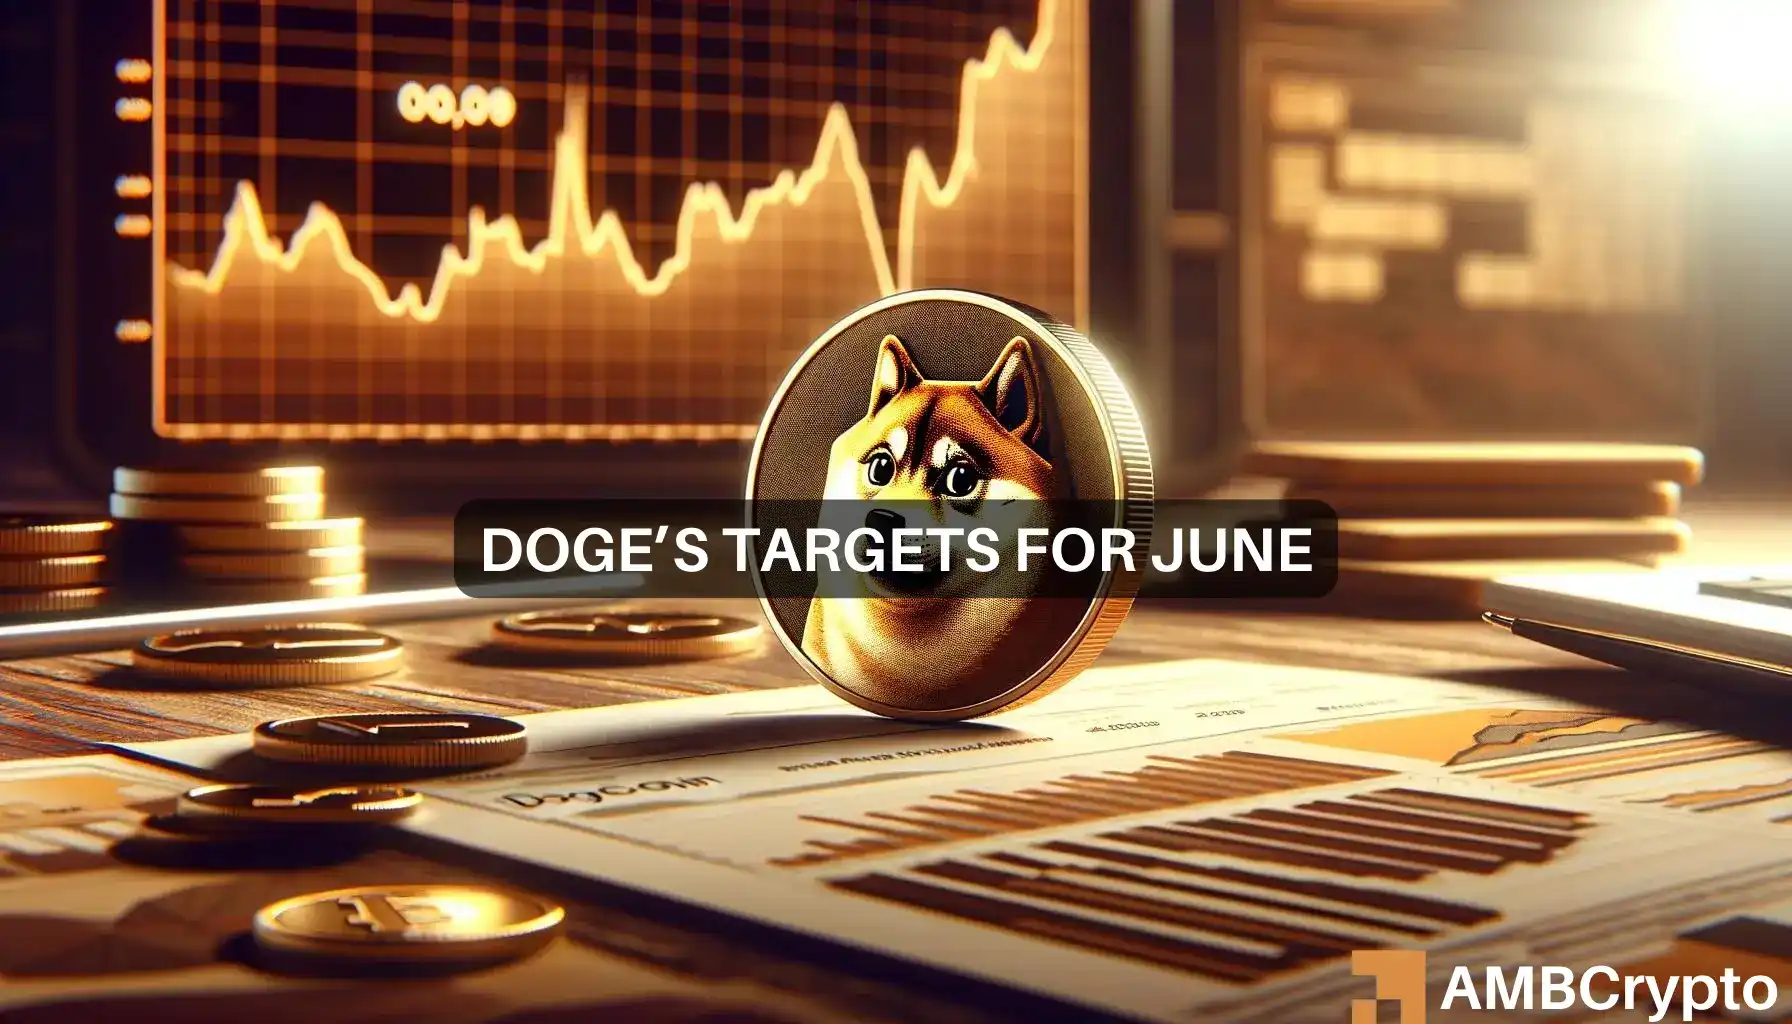 Dogecoin price prediction: Is a June rally likely?